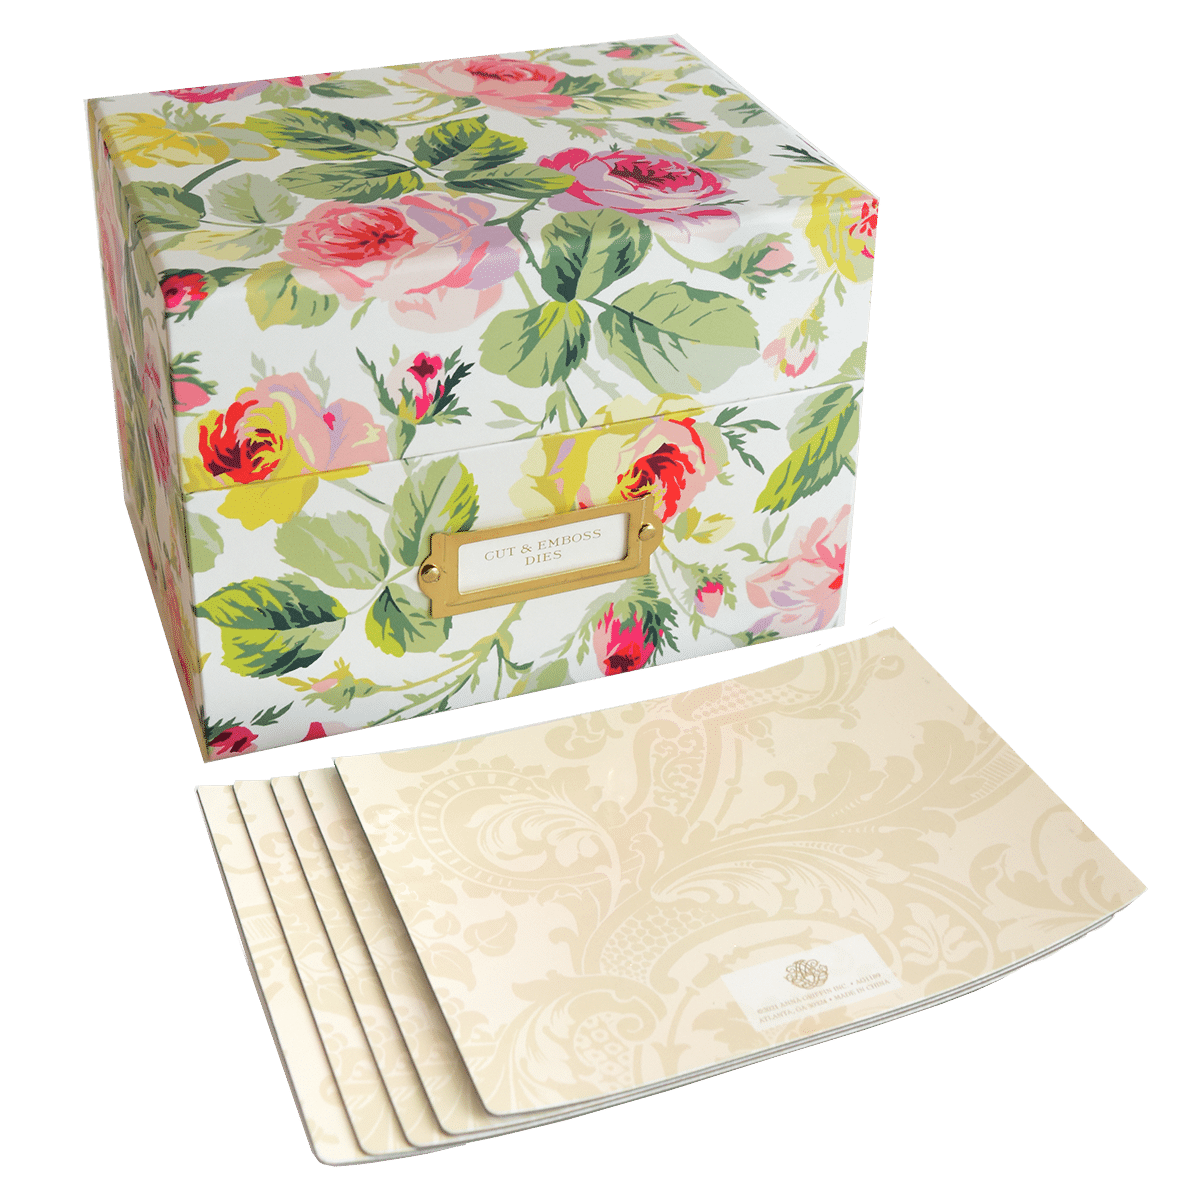 a box with a flower pattern on it.